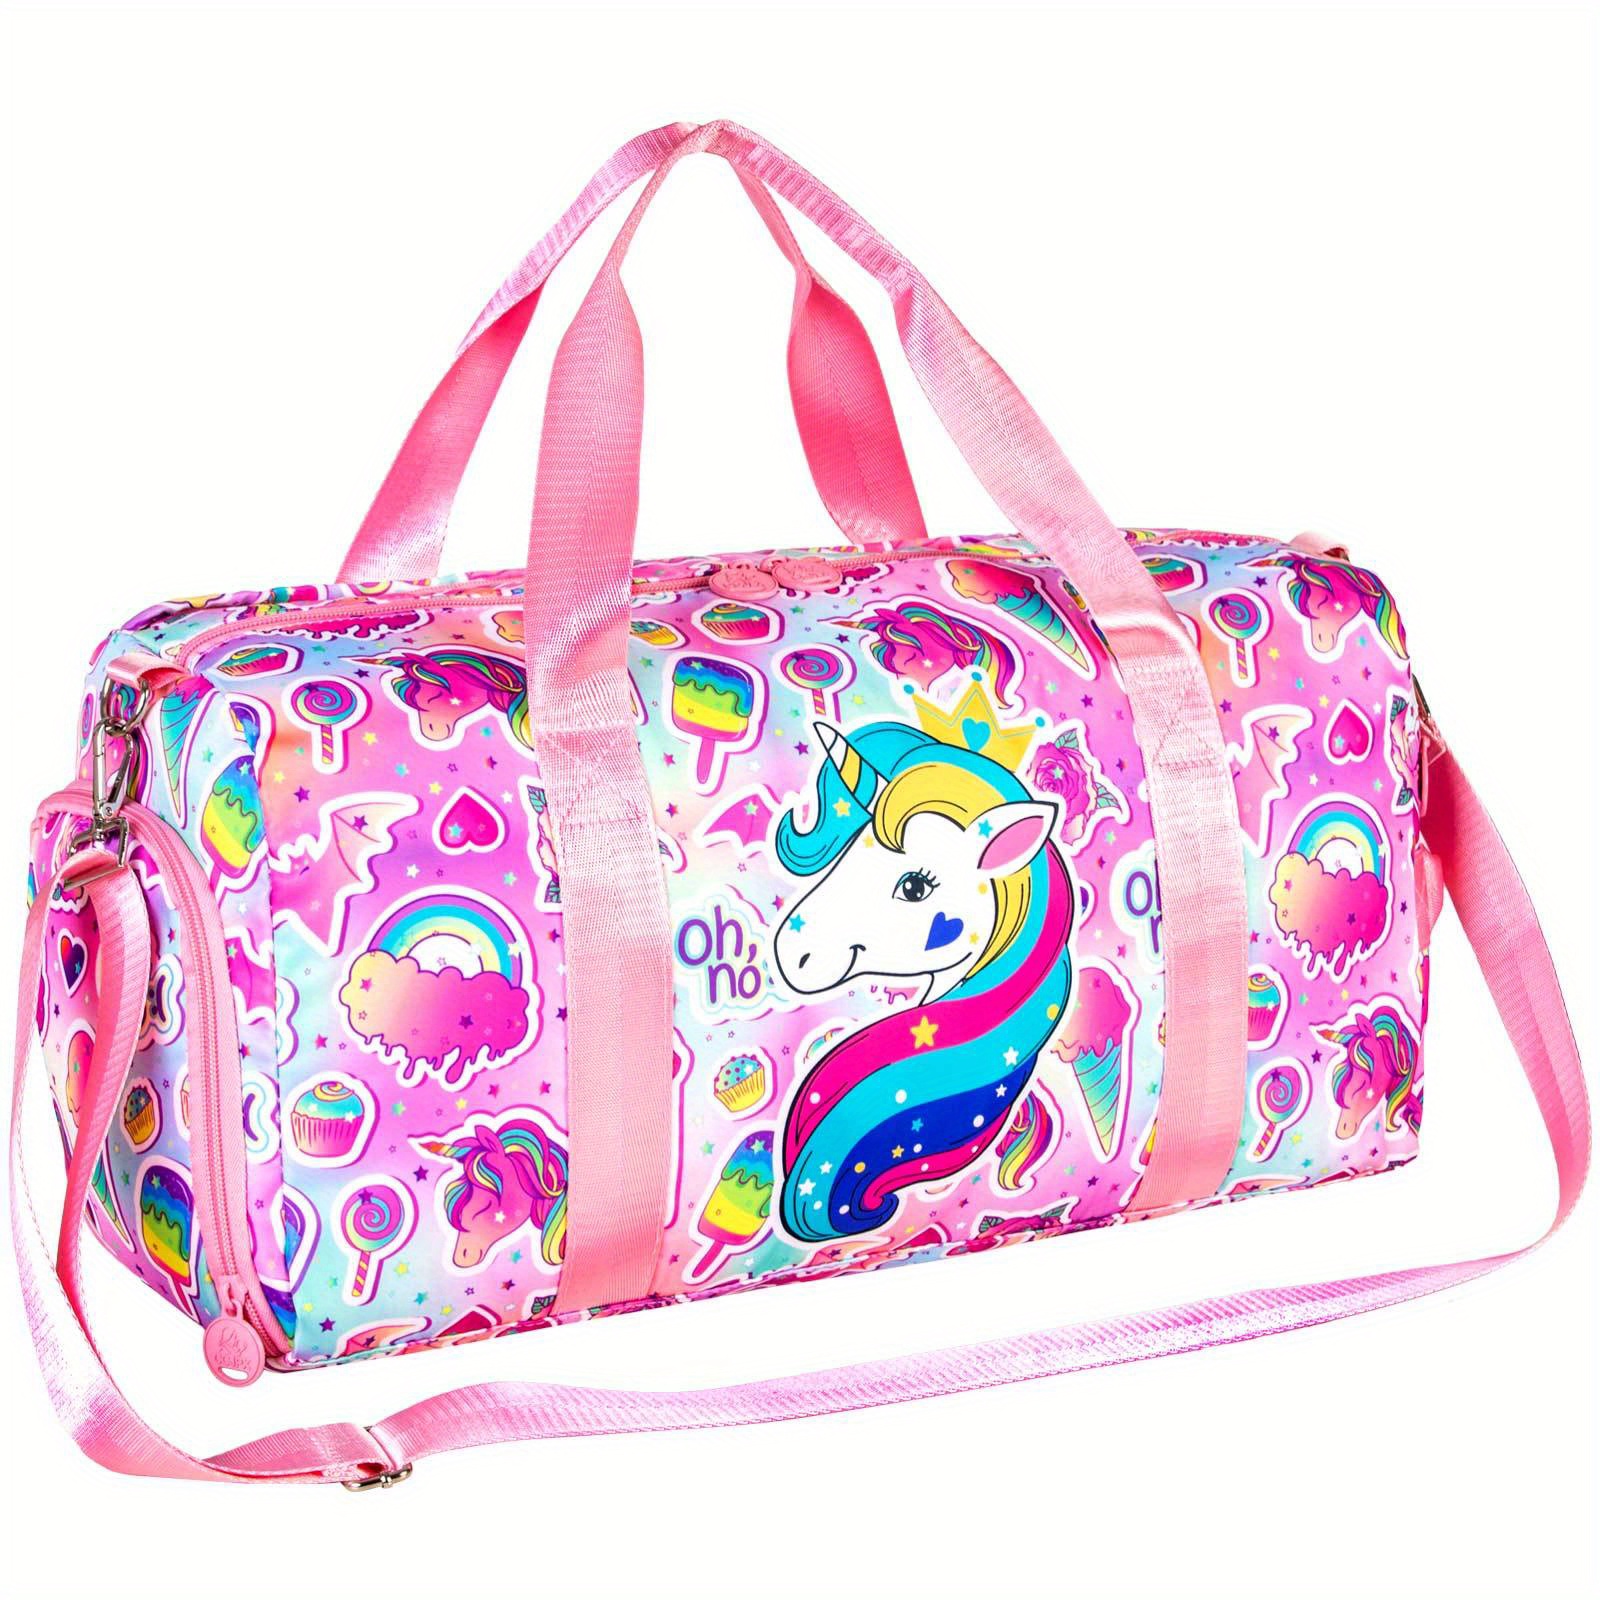 Kids Duffle Bag For Travel, Boys Girls Carry On Gym Bags With Shoe